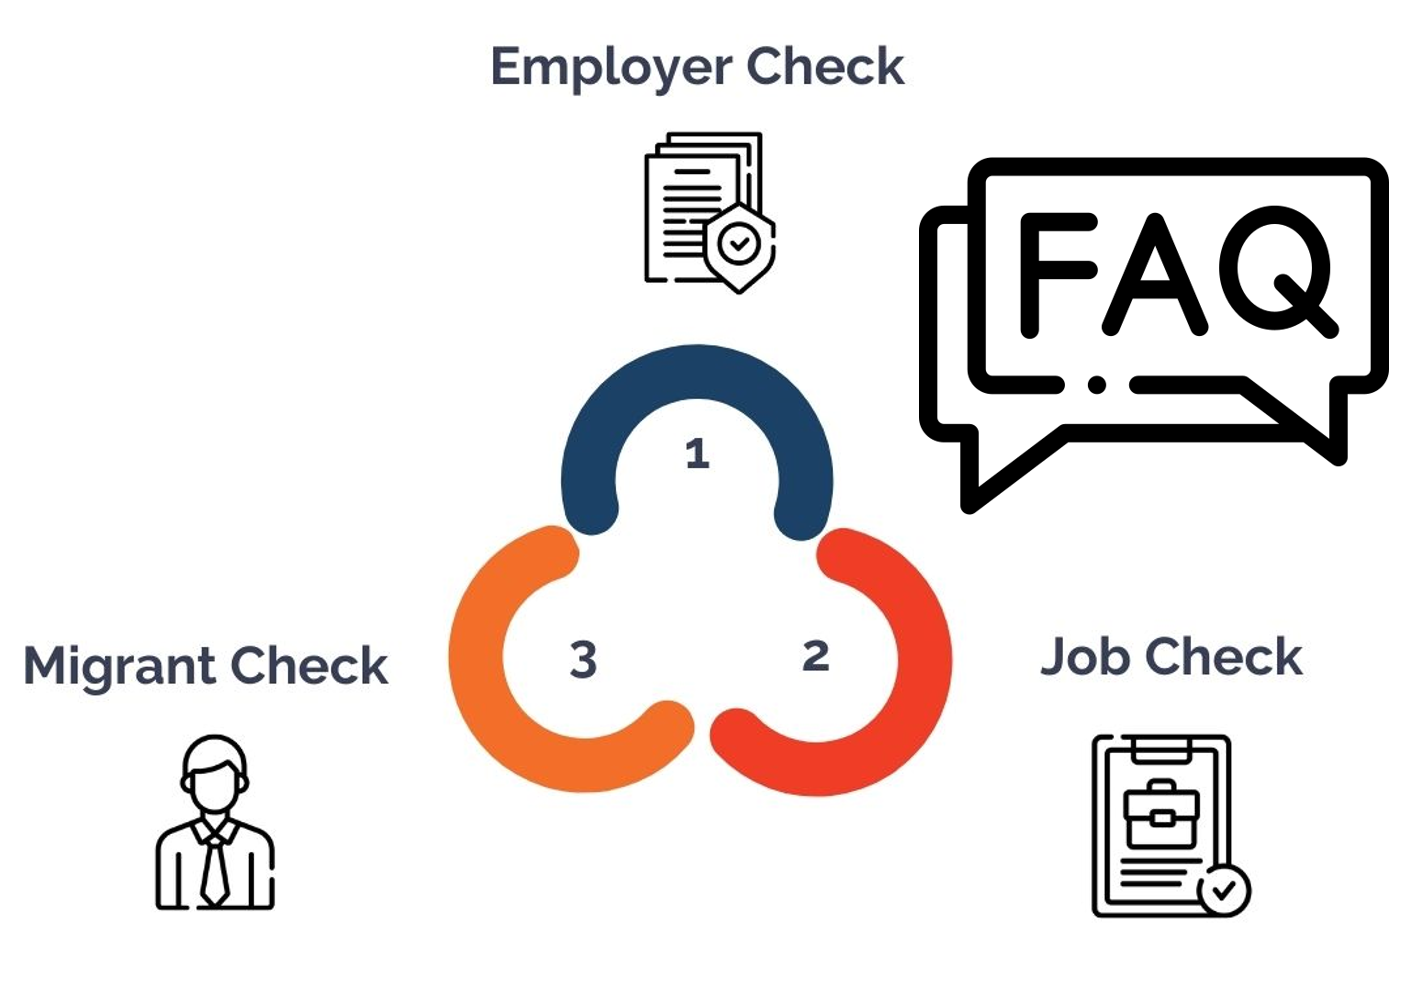 FAQs - Upcoming Employer Accreditation Changes Preview